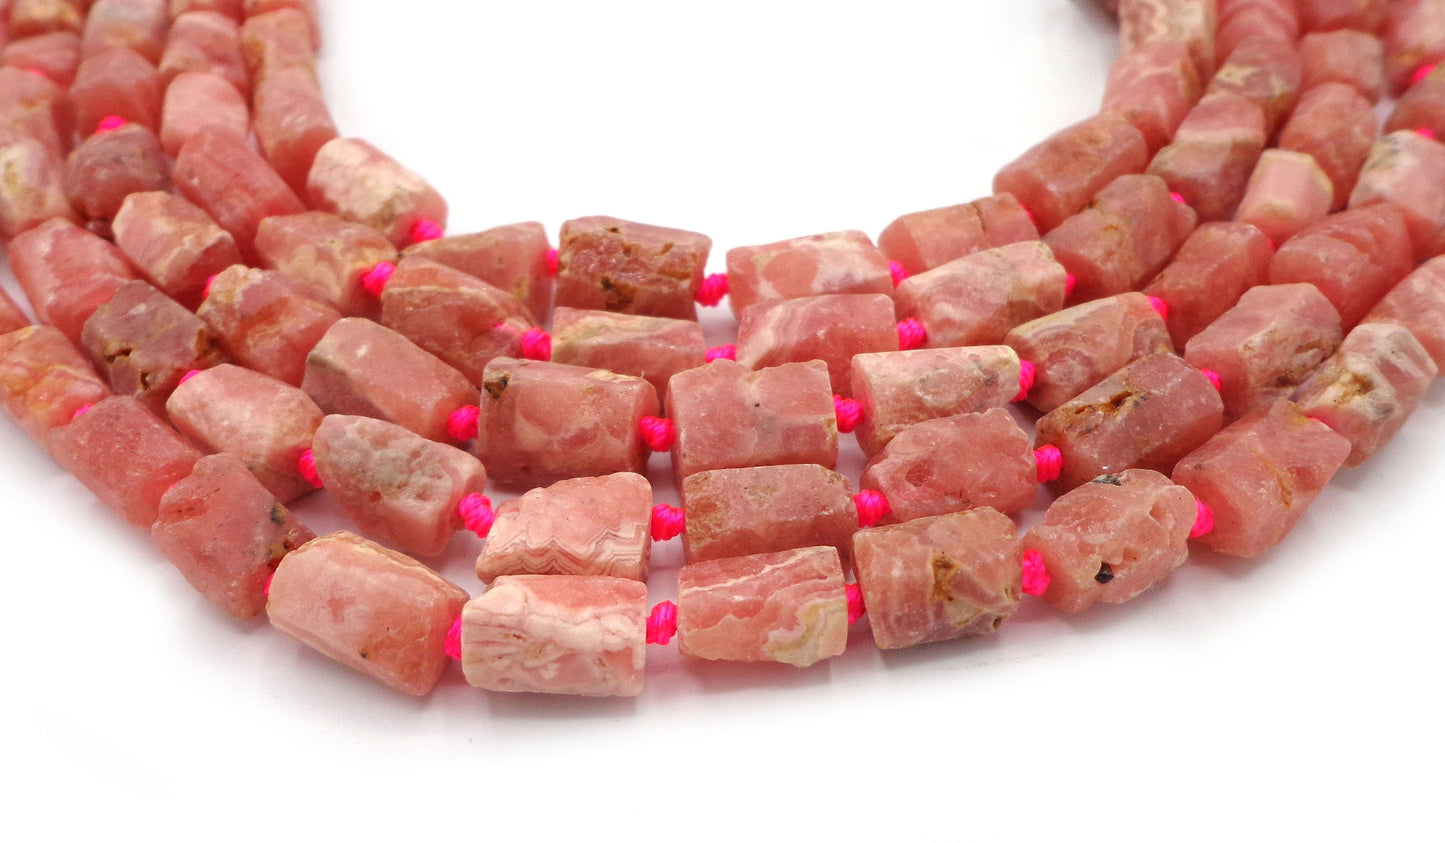 NATURAL Gemstone Rhodochrosite, Tube Shape 10x8mm, Full Strand 16" Great for making Jewelry! Not treated in anyway! AAA quality